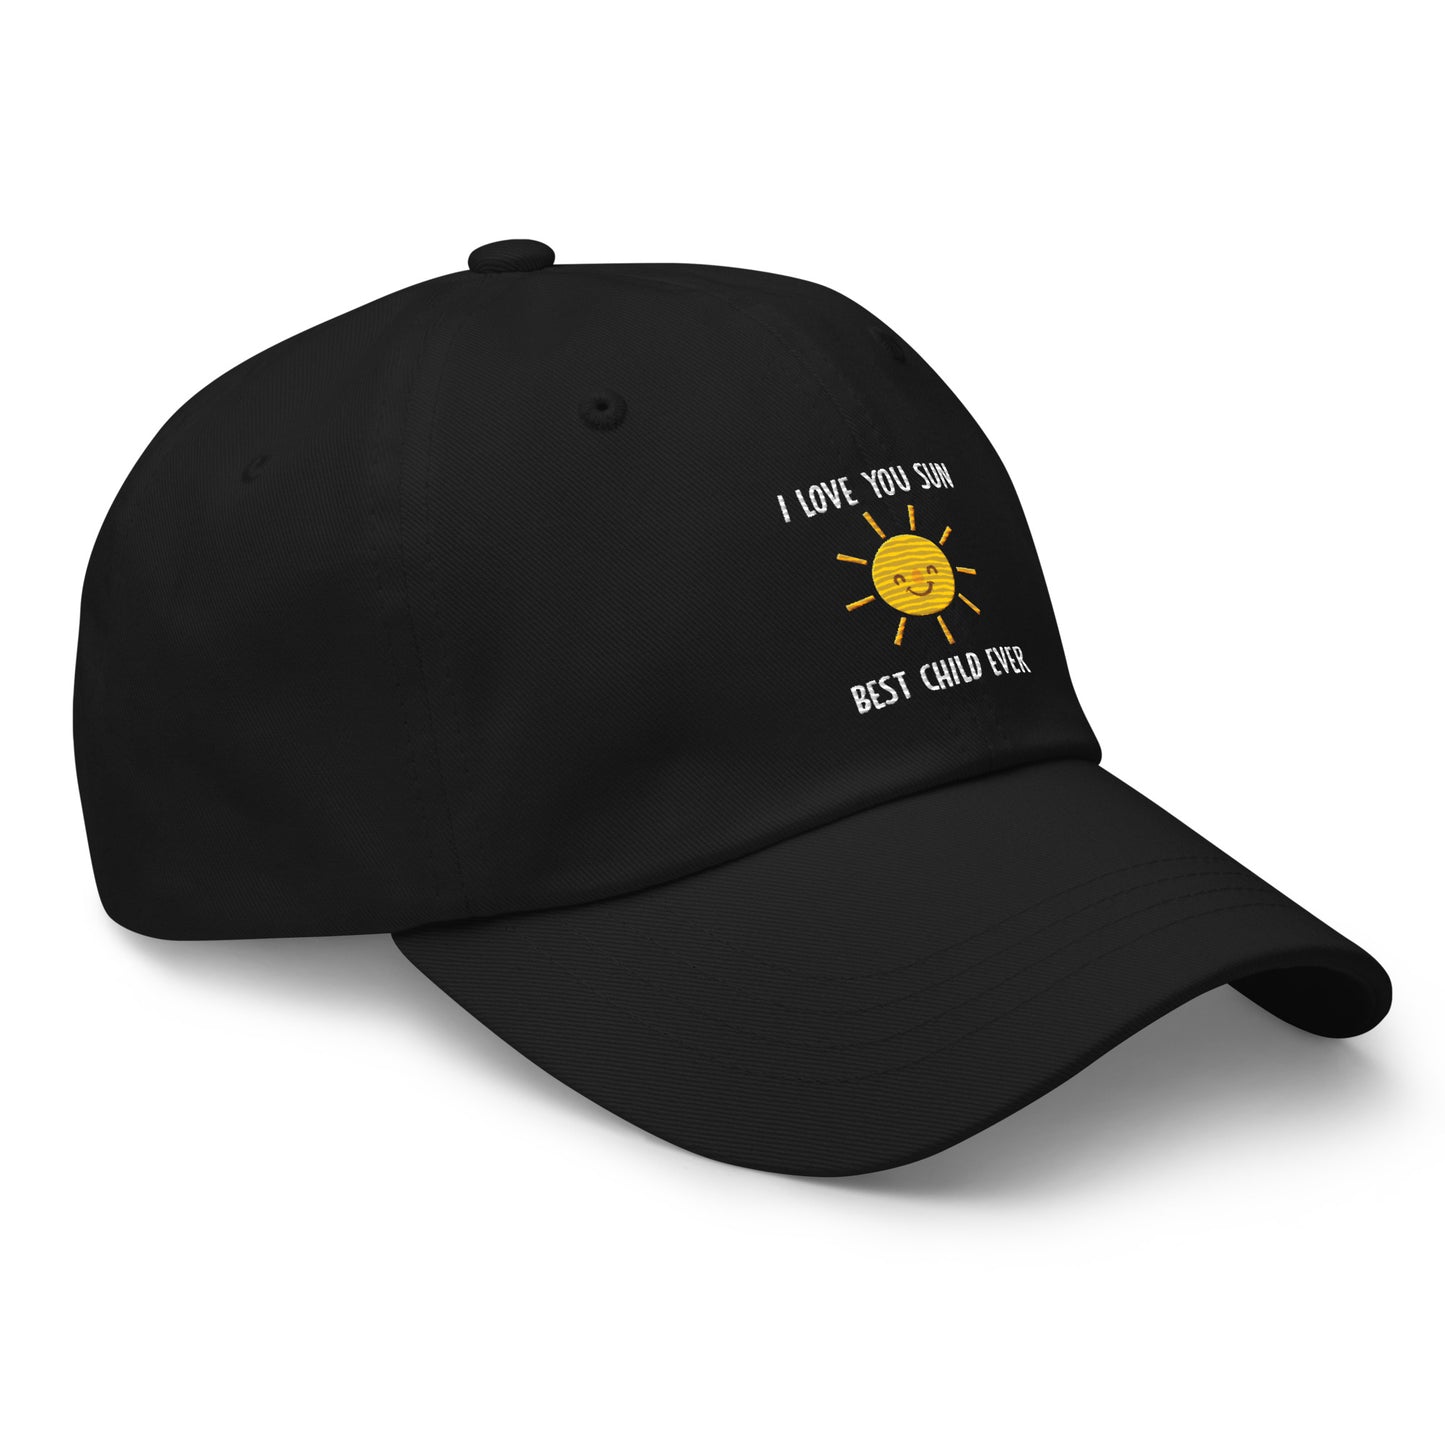 I Love You Sun Best Child Ever Dad hat